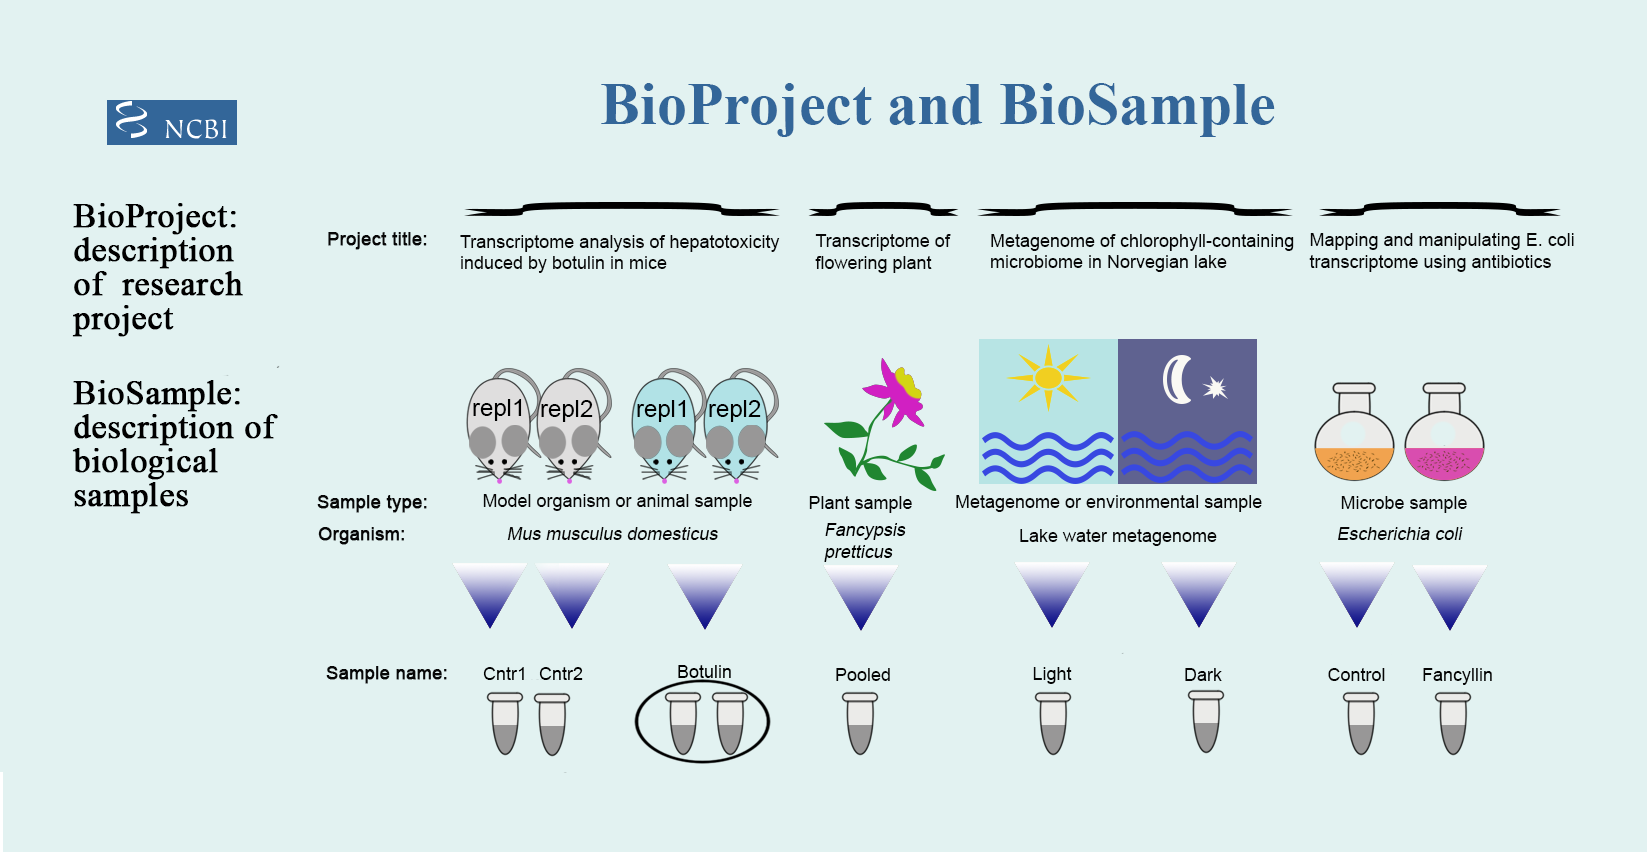 Anatomy of BioProject and BioSample submission